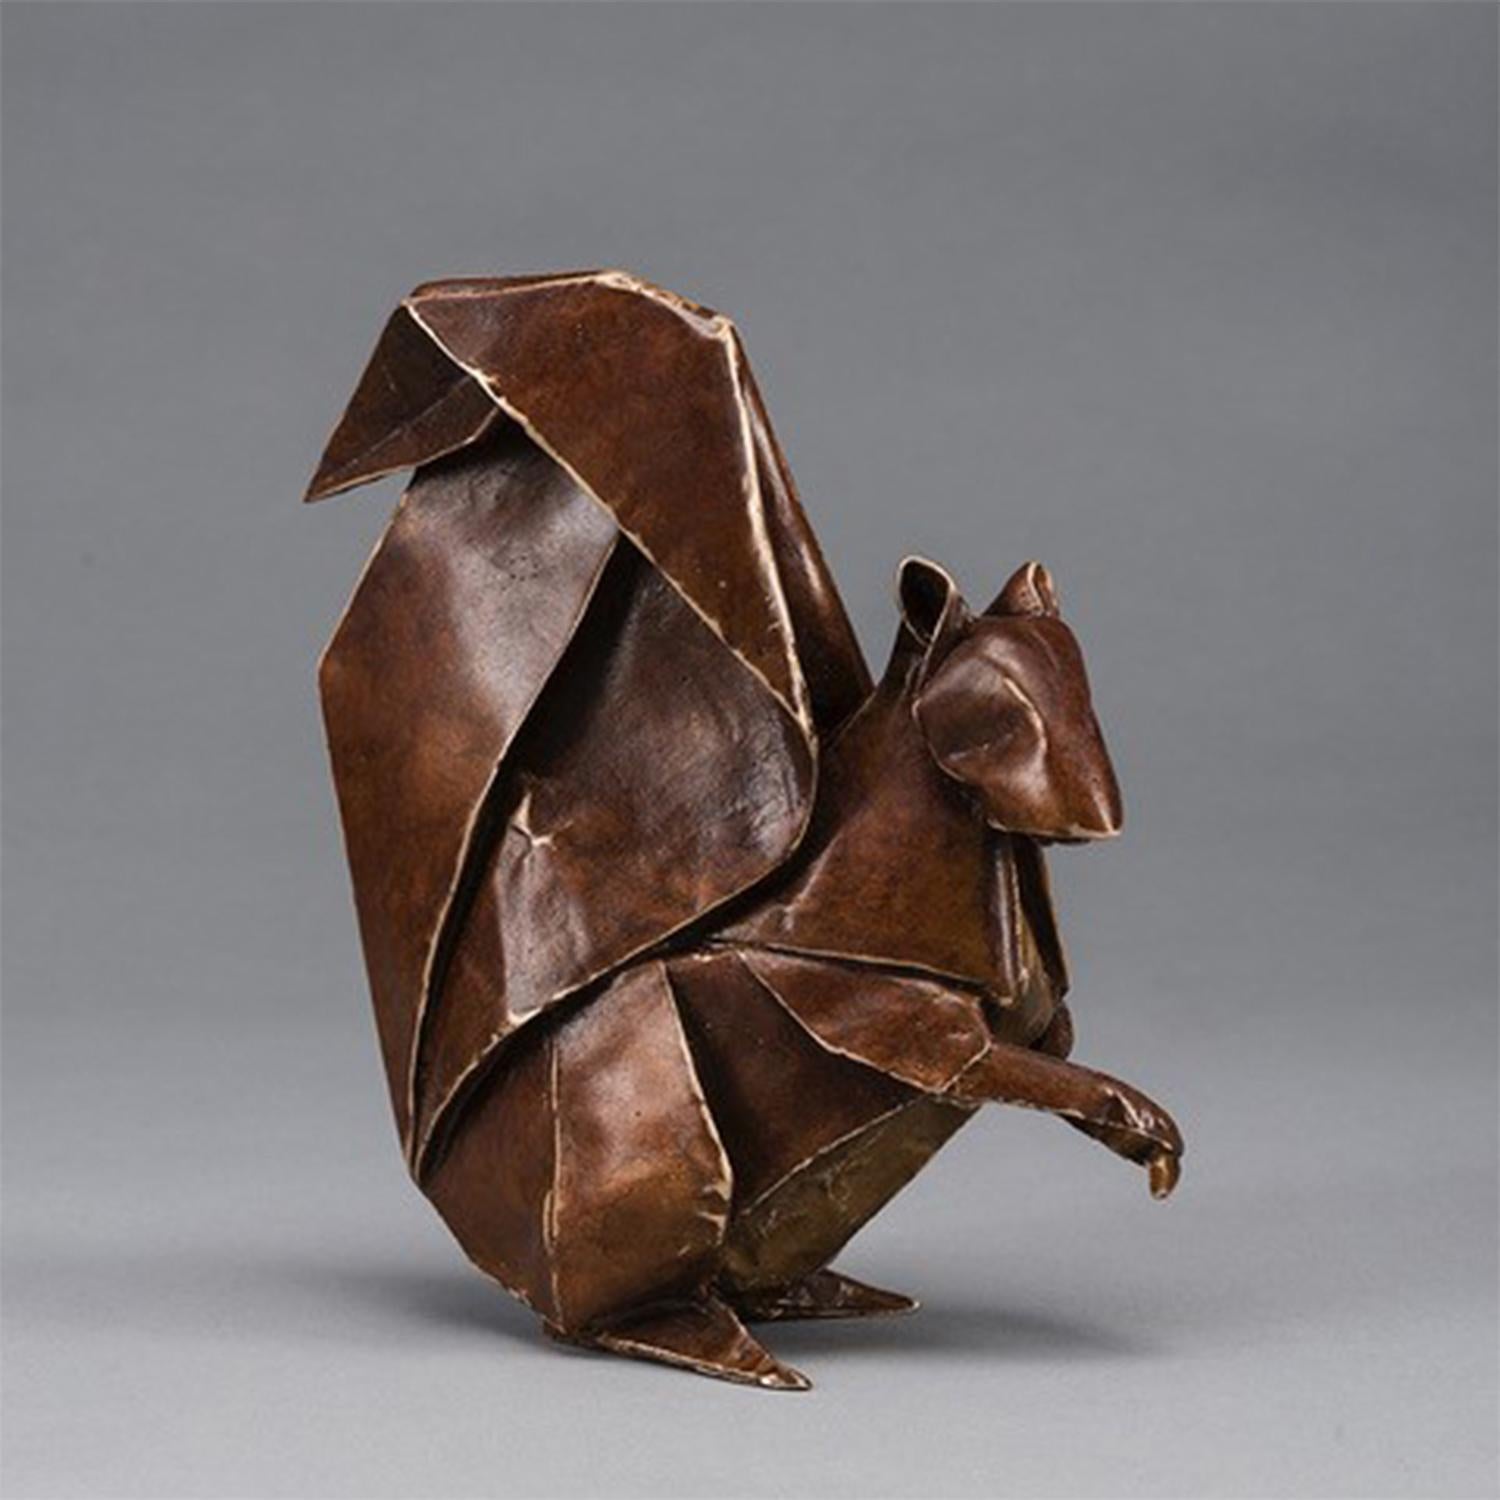 Kevin Box Figurative Sculpture - Seed Sower (Brown) 18/50